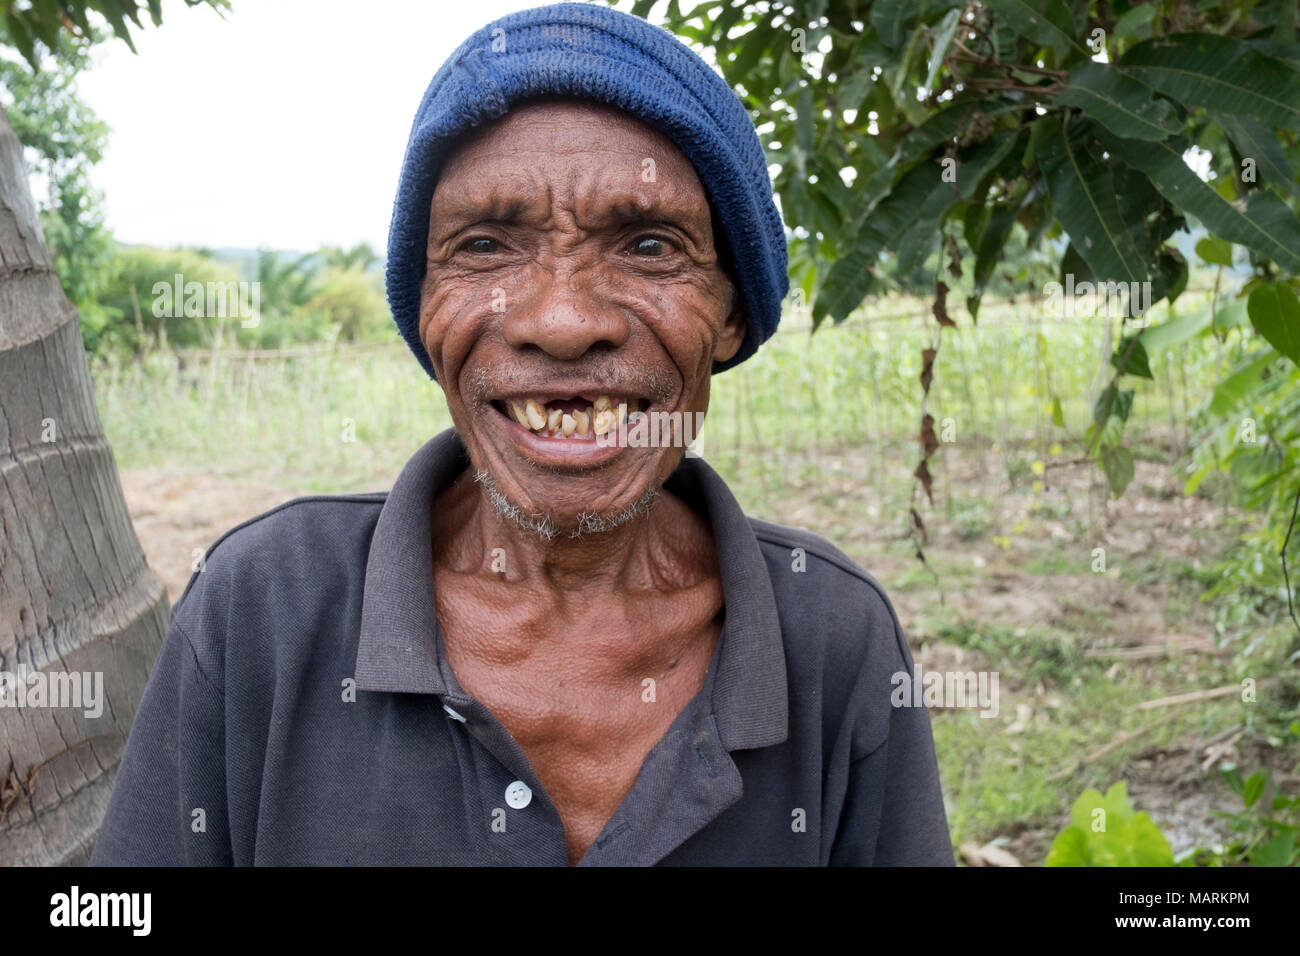 An elderly villager in Kasait, Liquica, Timor-Leste. Because of a lack of infrastructure in the mountains, access to healthcare is difficult for the villagers and there is widespread malnutrition. This man is also losing his teeth, due to the fact there are no dental facilities. Stock Photo